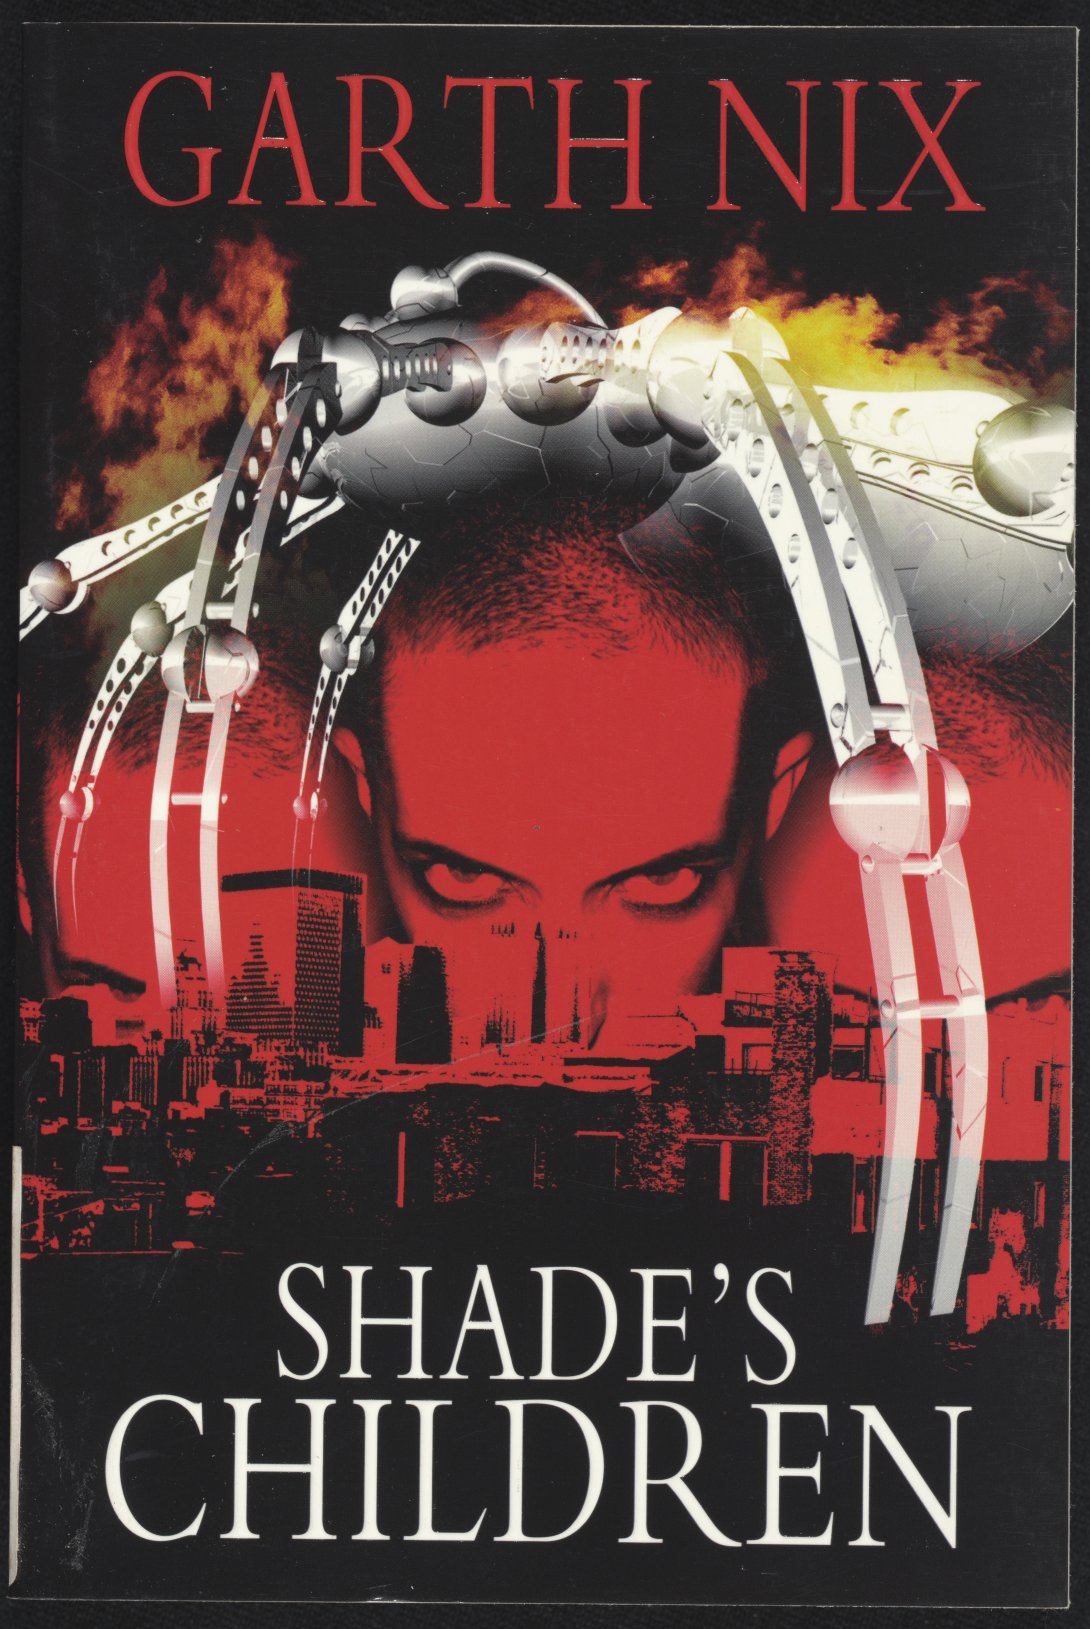 'Shade's Children' book cover, with black and red image of a person looking over a city with a robotic spider-like creature standing above them